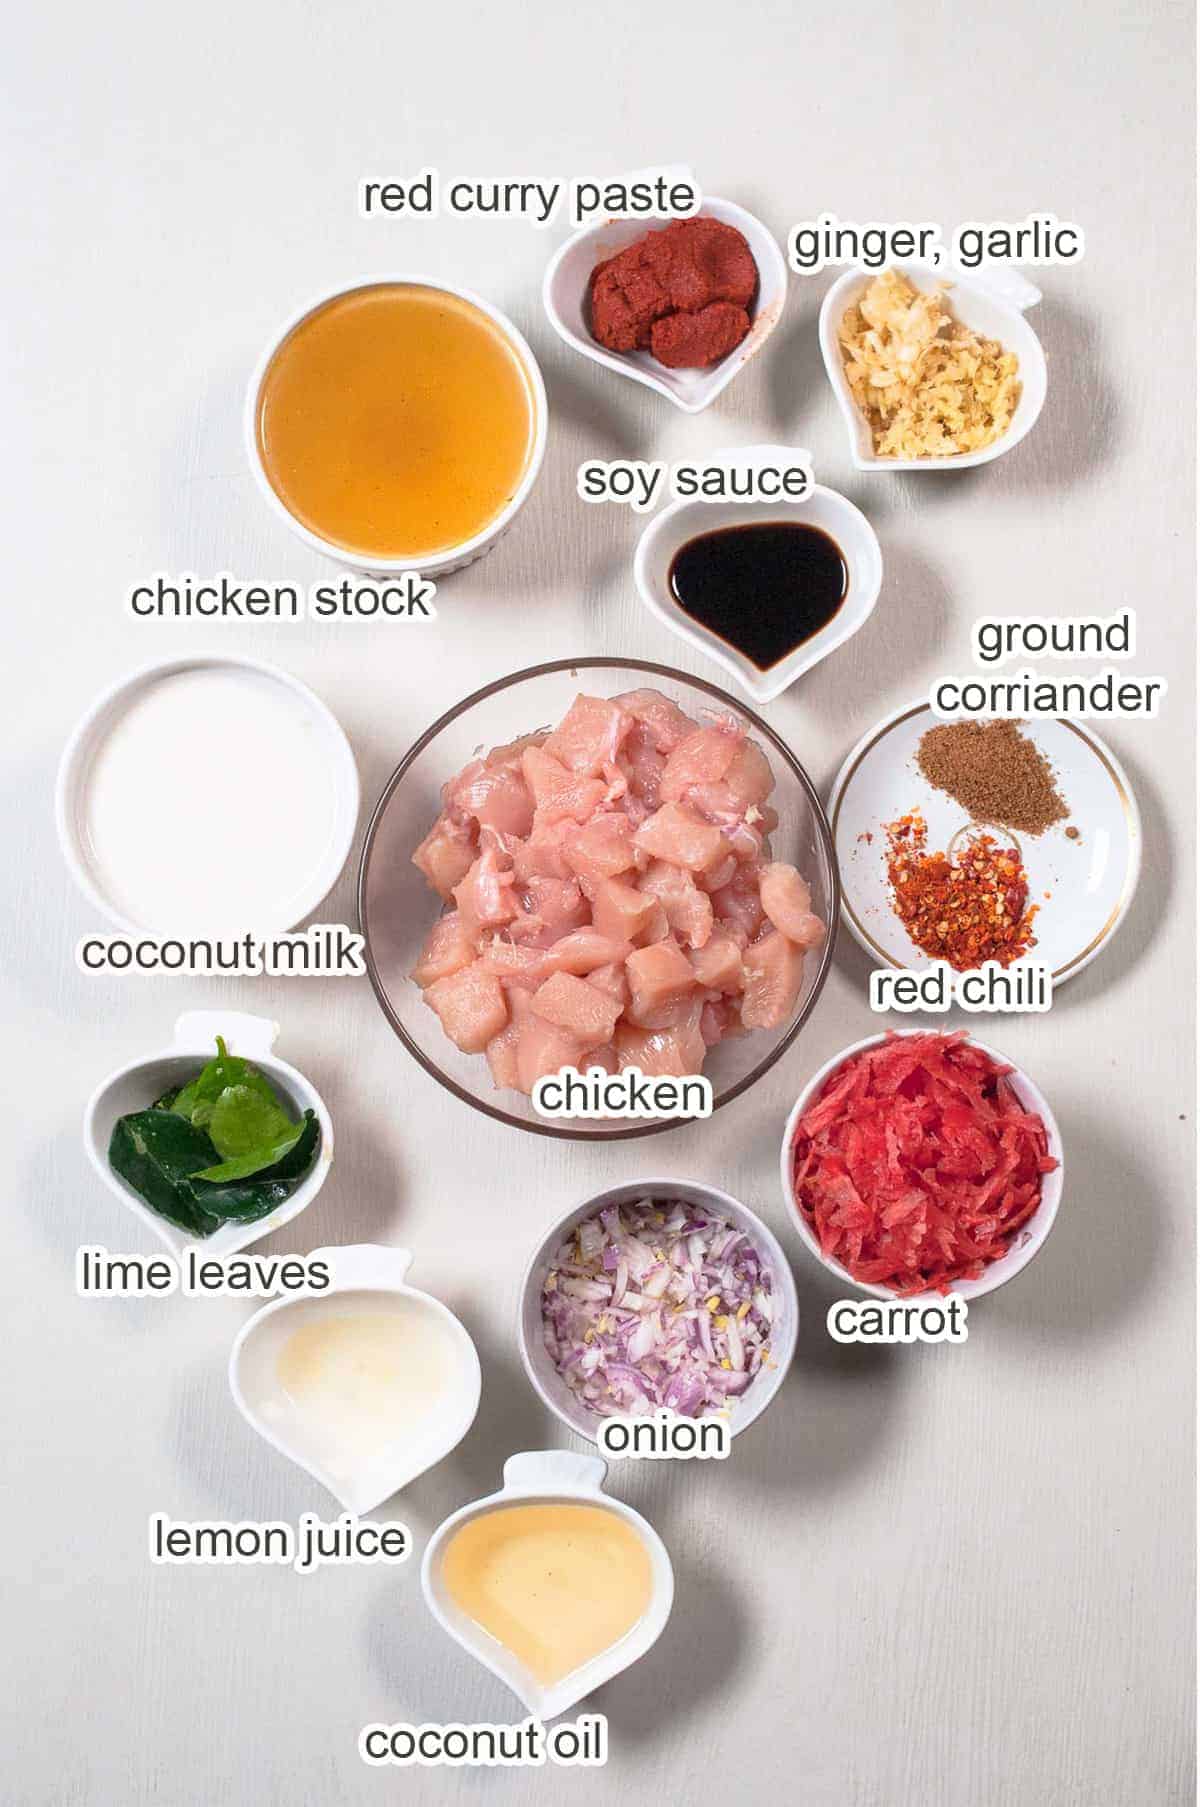 Ingredients of Thai red curry on white background.